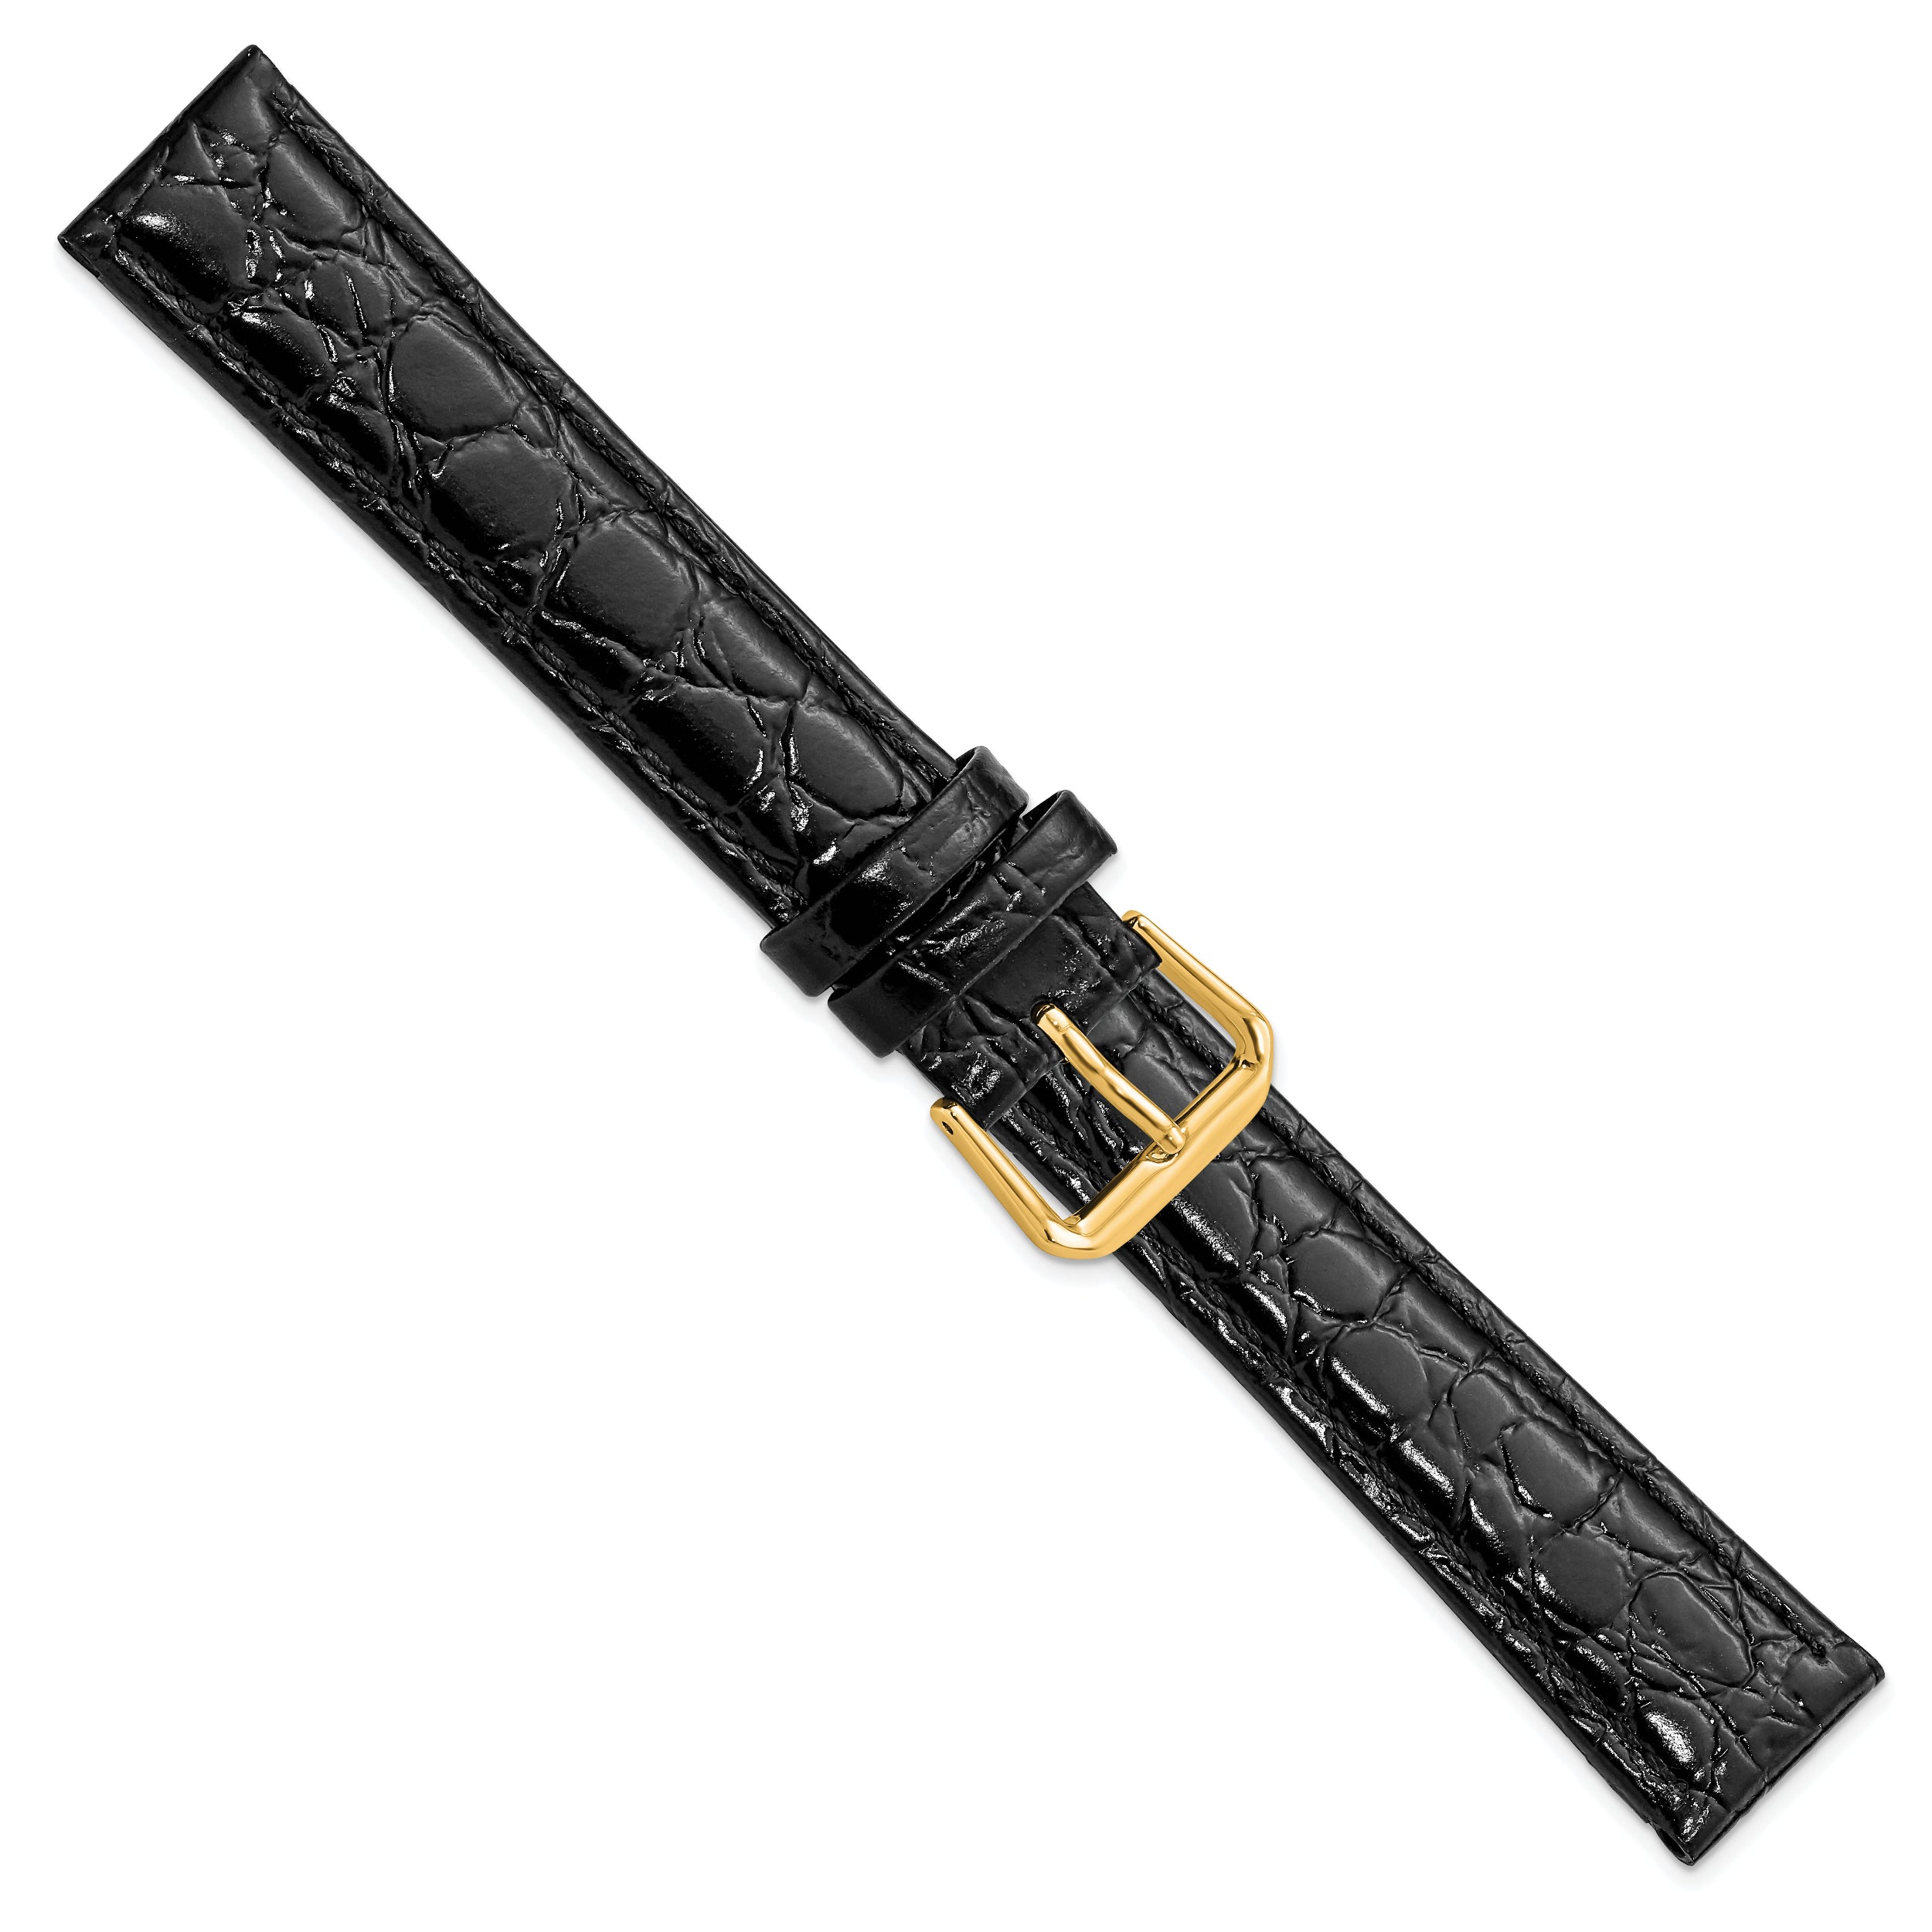 16mm Long Black Alligator Grain Leather with Gold-tone Buckle 8.5 inch Watch Band